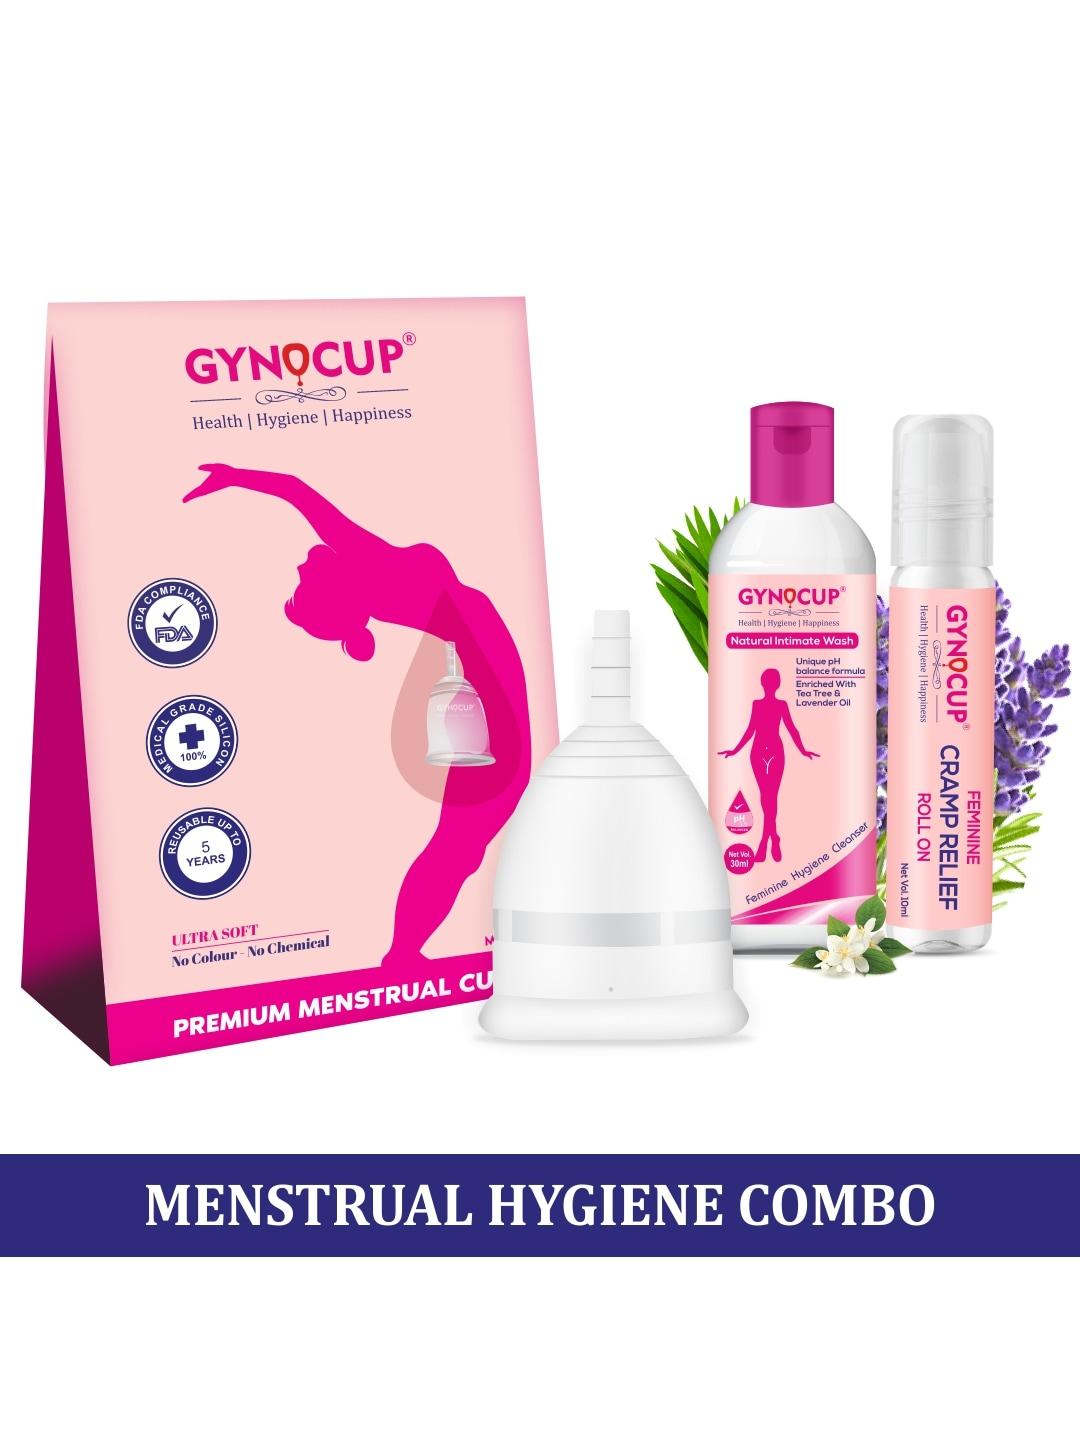 gynocup-large-size-premium-reusable-menstrual-cup+cleanser-wash-30ml+intimate-wash-30ml